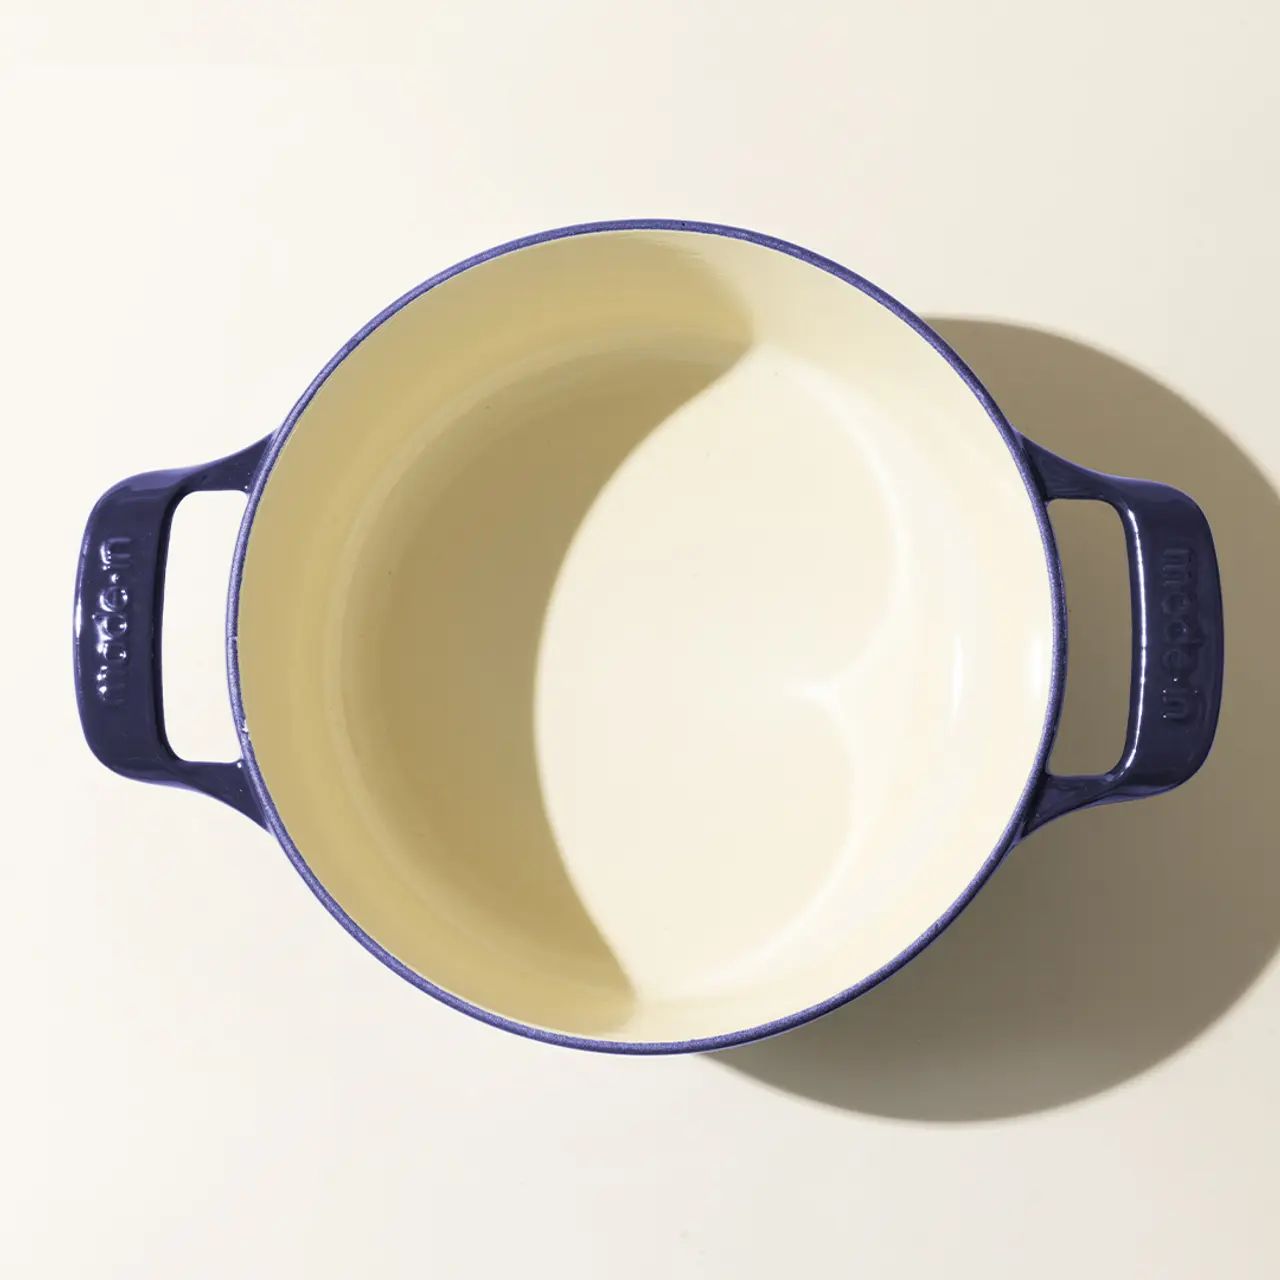 Top-down view of an empty, cream-colored round casserole dish with two navy blue handles, casting a shadow on a light surface.